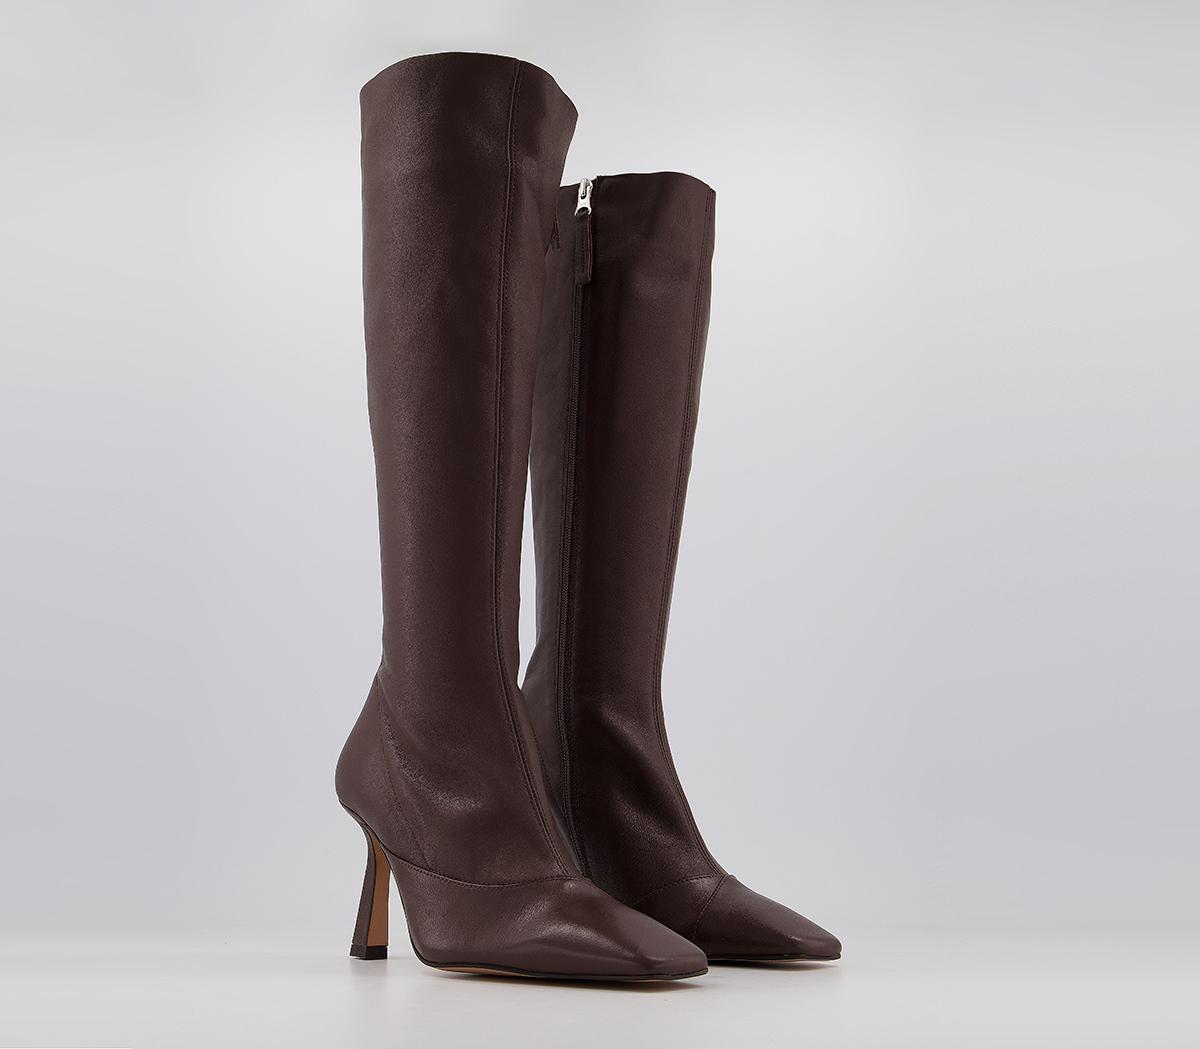 OFFICE Kimber Square Toe Knee Boots Choc Leather - Knee High Boots